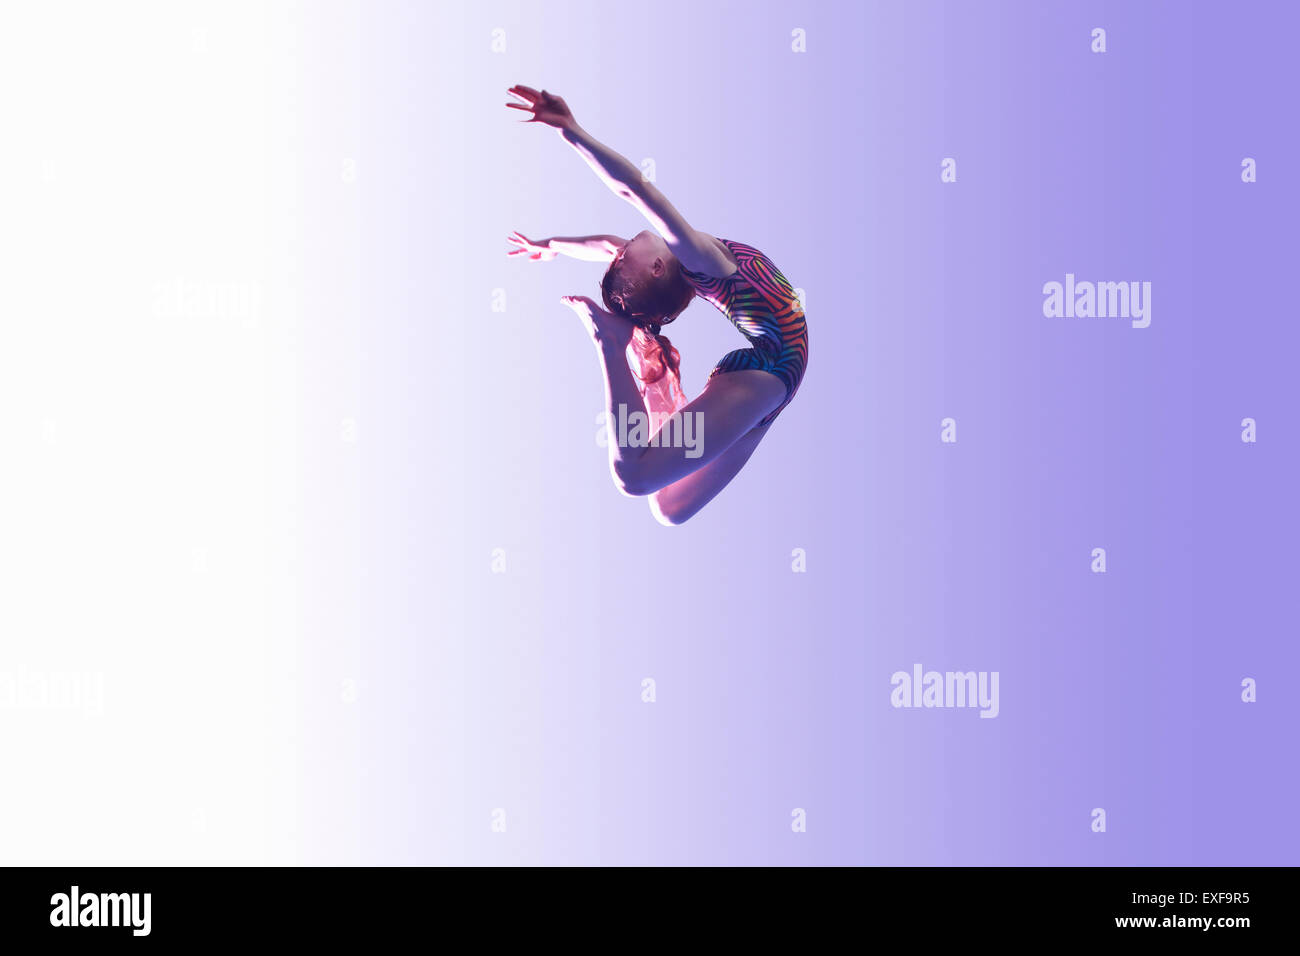 Young gymnast in mid-air leap Stock Photo